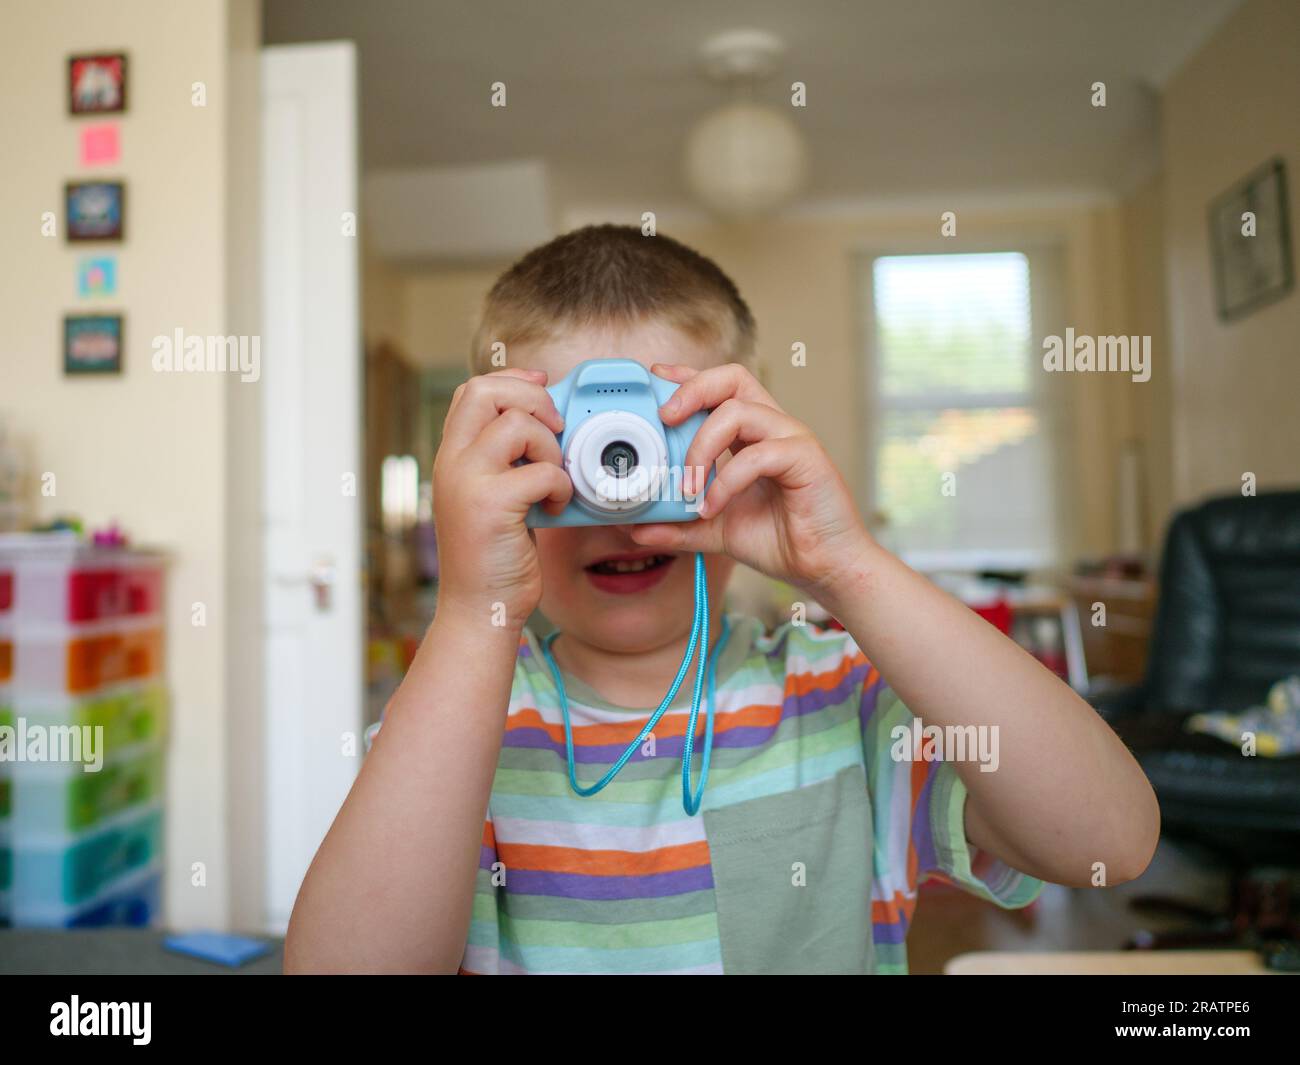 Young four year old child taking photos with a small plastic camera Stock Photo